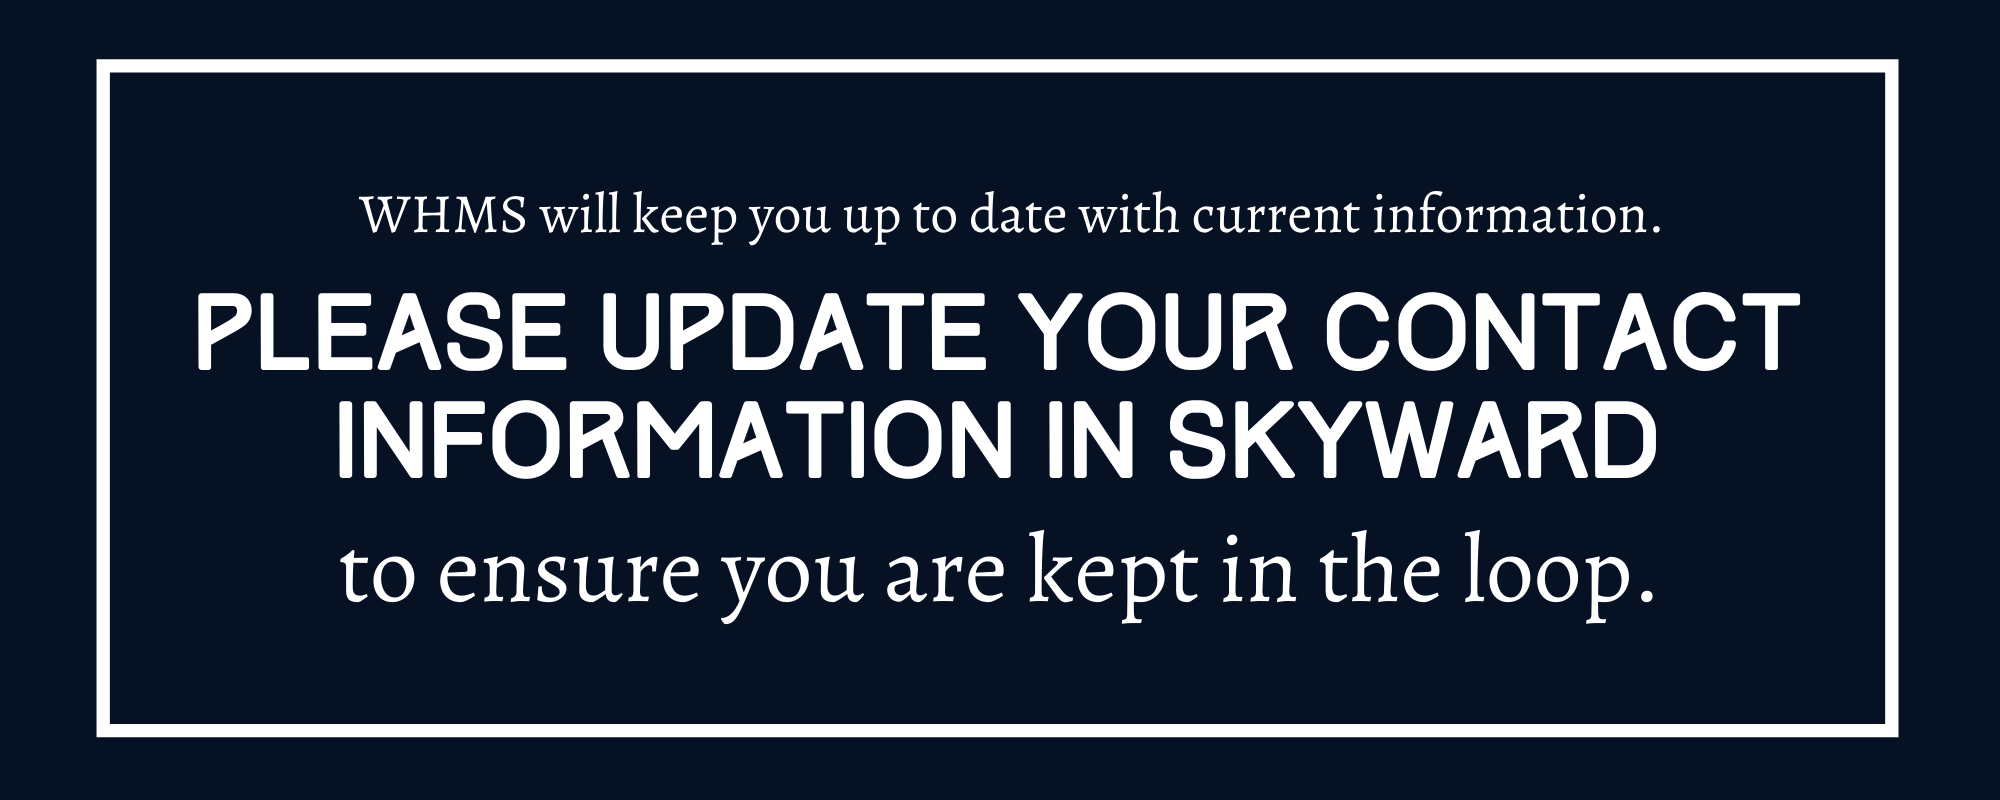 WHMS will keep you up to date with current information. Please update your contact information in Skyward to ensure you are kept in the loop.